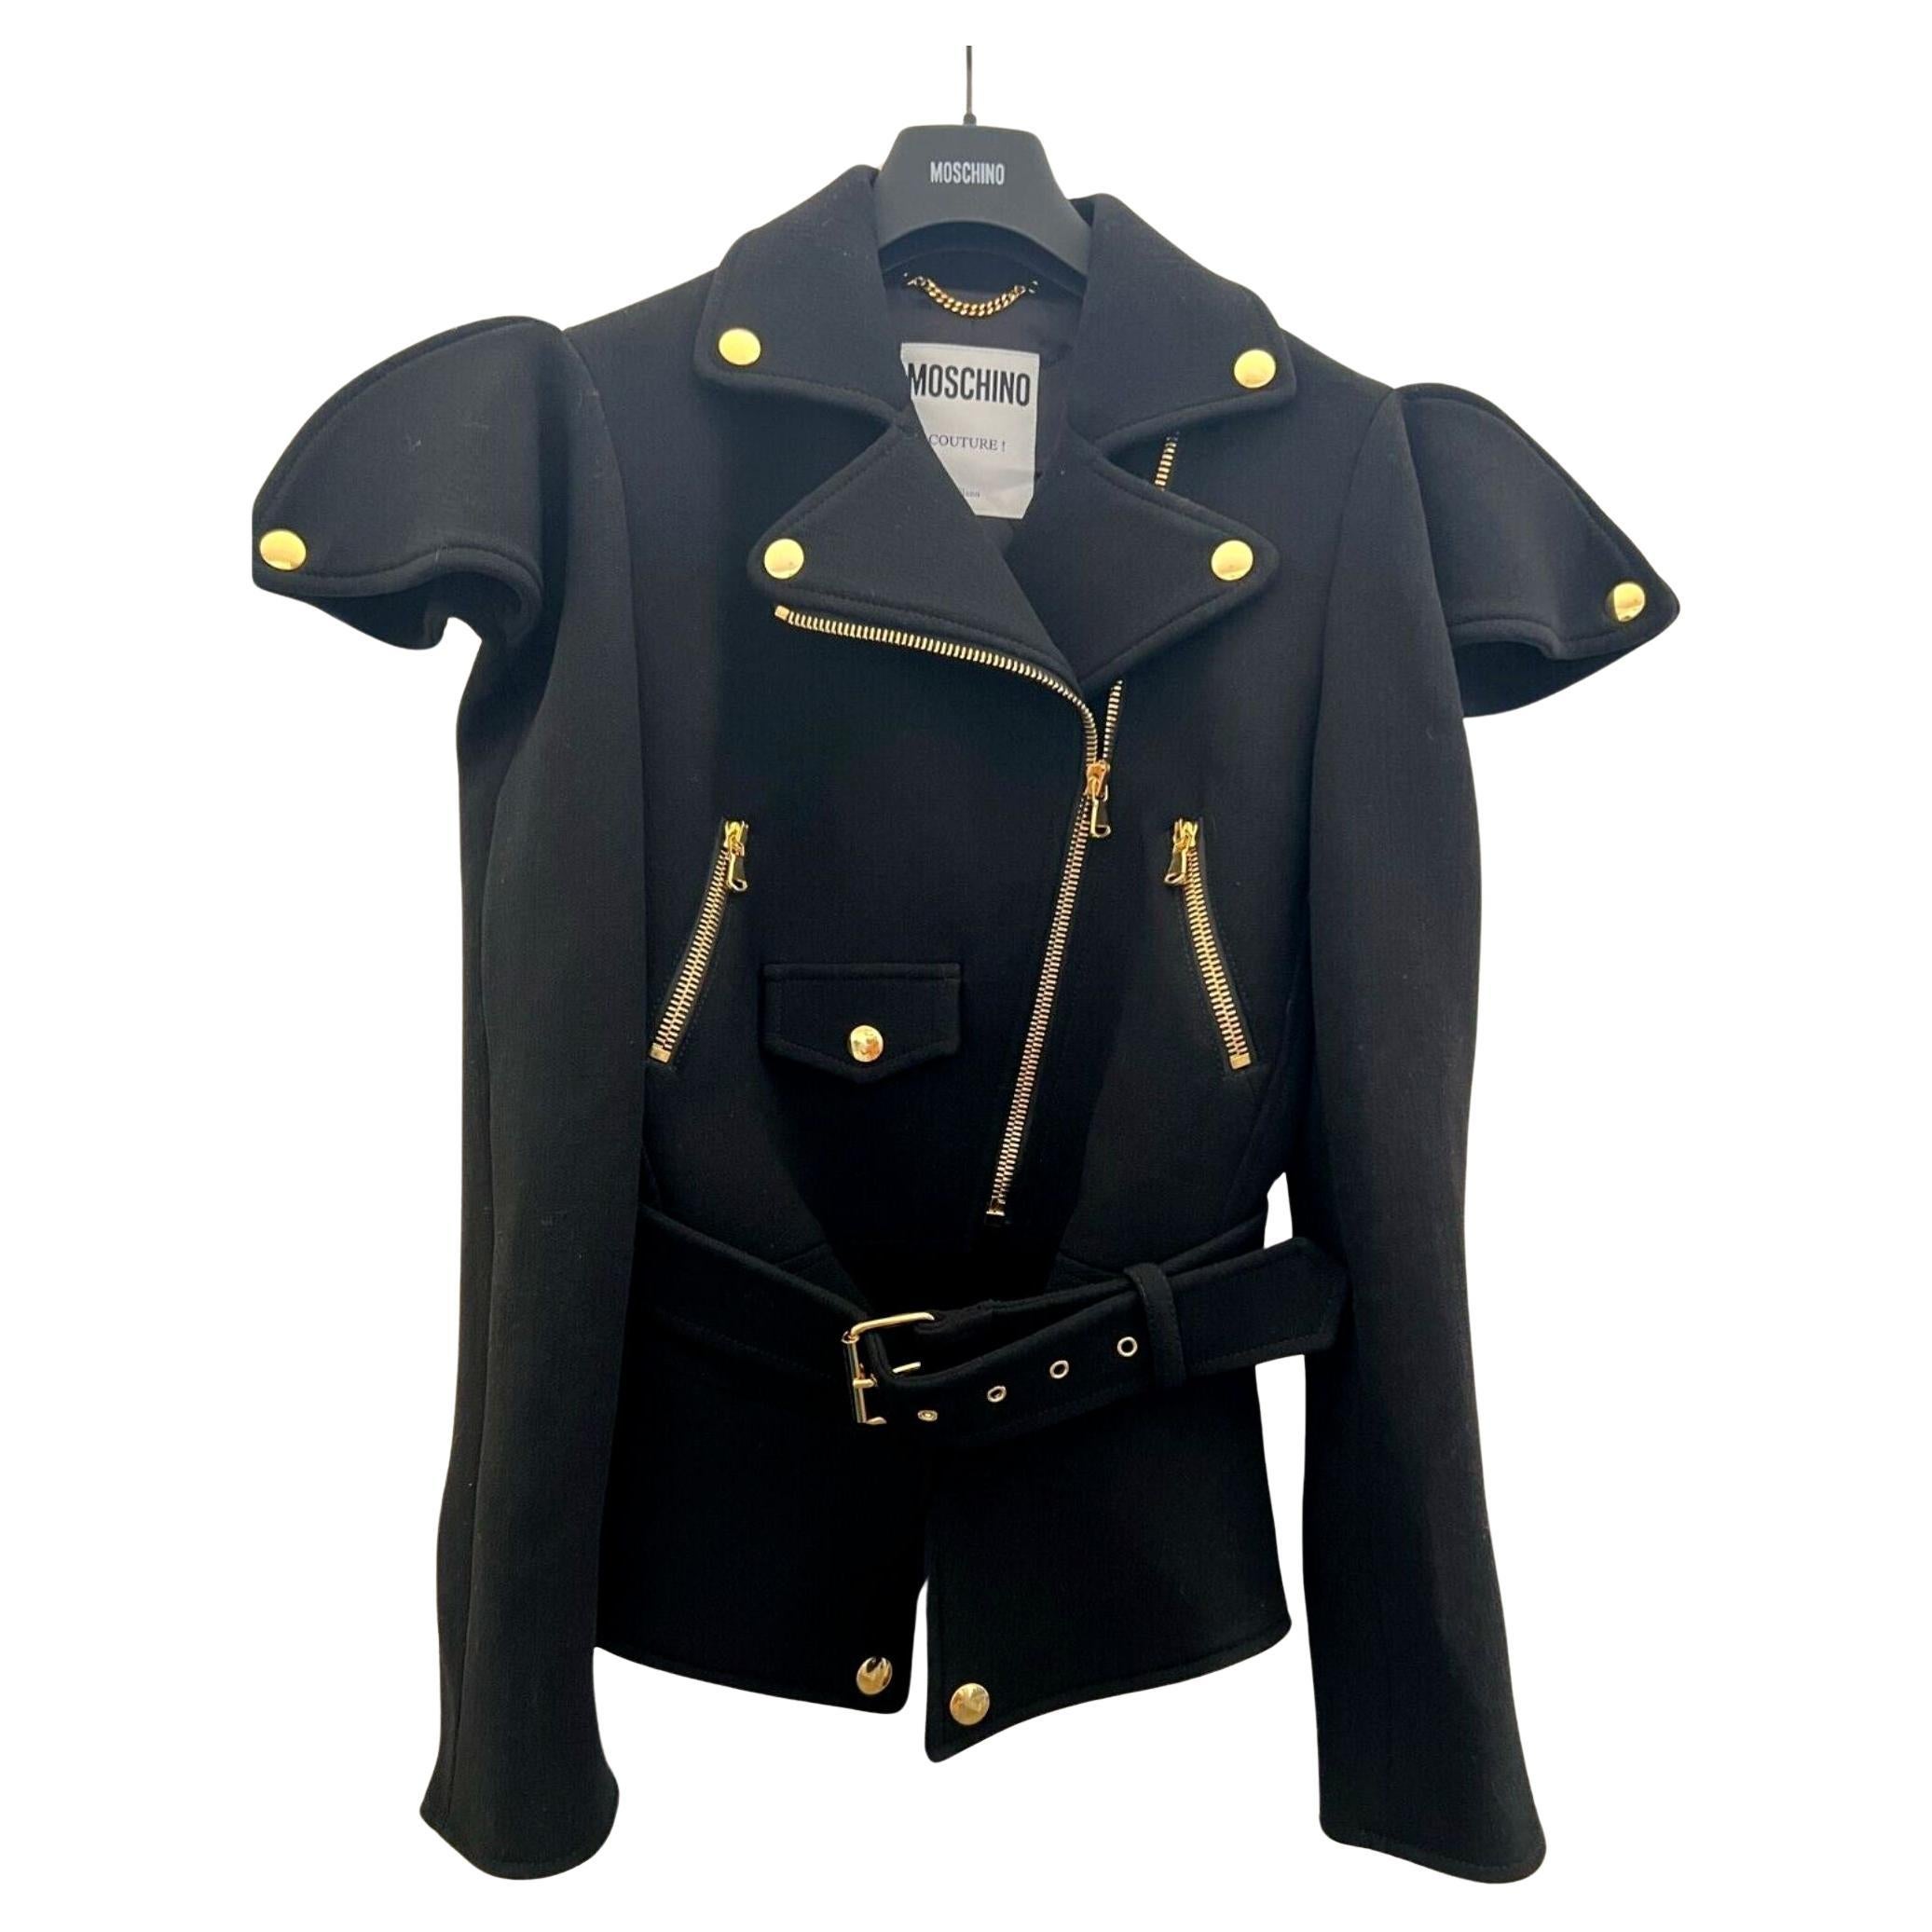 AW21 Moschino Couture Viscose Jacket/Coat with Gold Hardware by Jeremy Scott For Sale